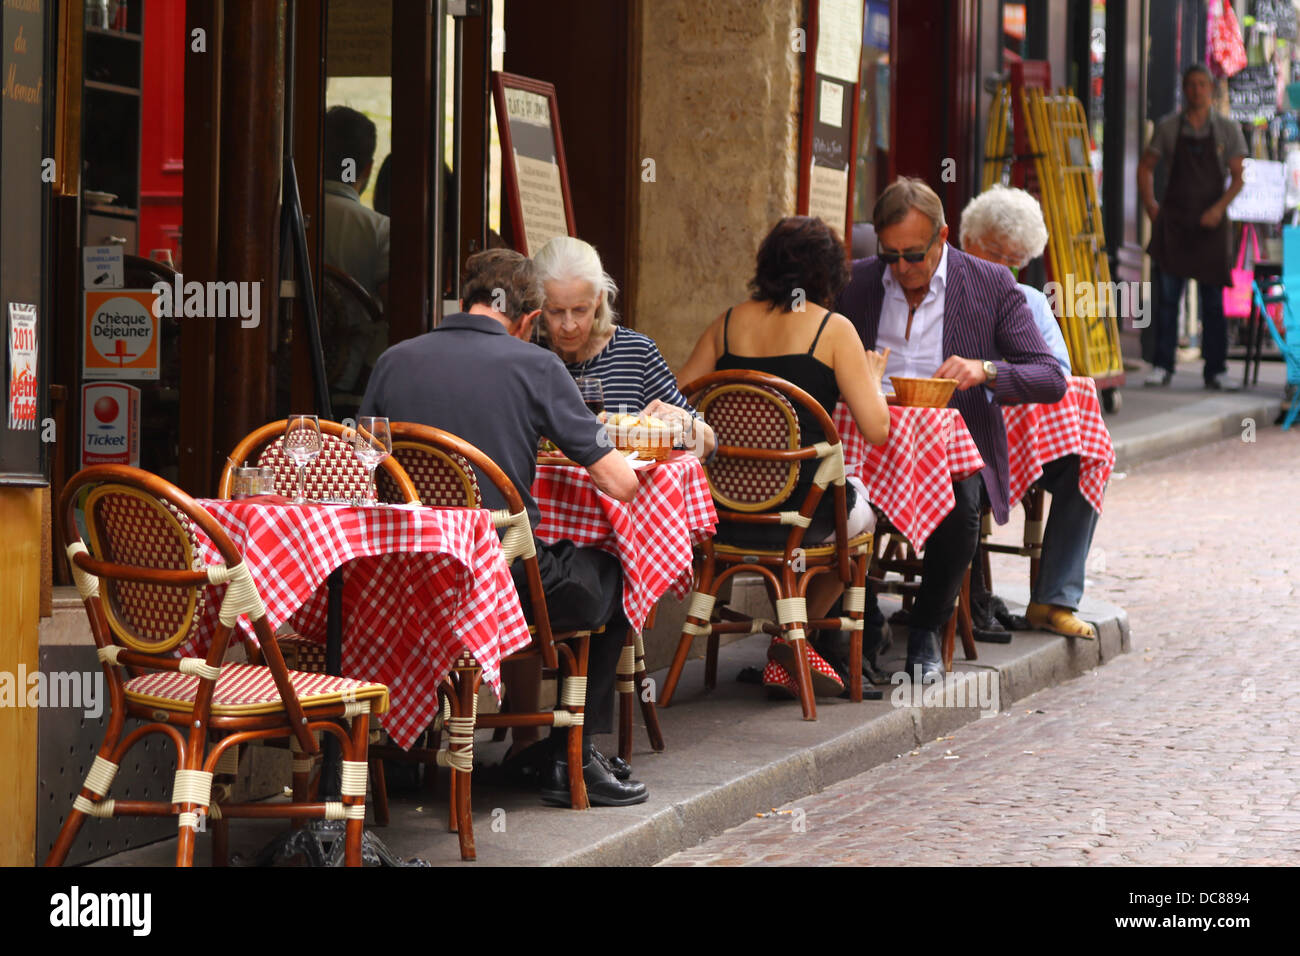 People eating in one of the traditional outdoor French cafés at rue Mouffetard in Paris, France Stock Photo